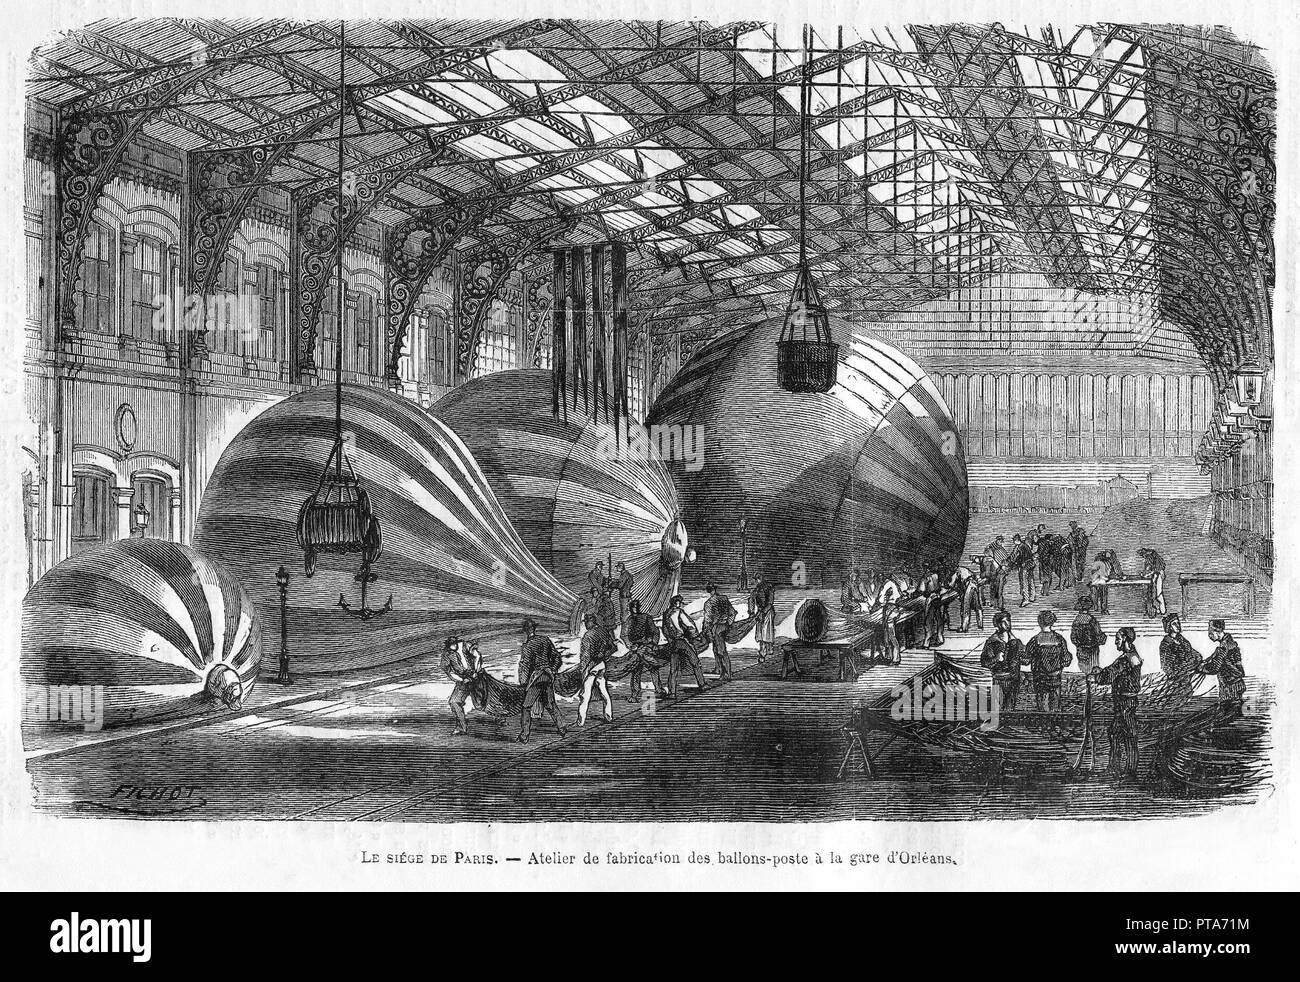 Manufacture of Mail Balloons at Gare d'Orleans during the Siege of Paris, pub. 1871 (engraving). Creator: Charles Fichot (1817 - 1903). Stock Photo